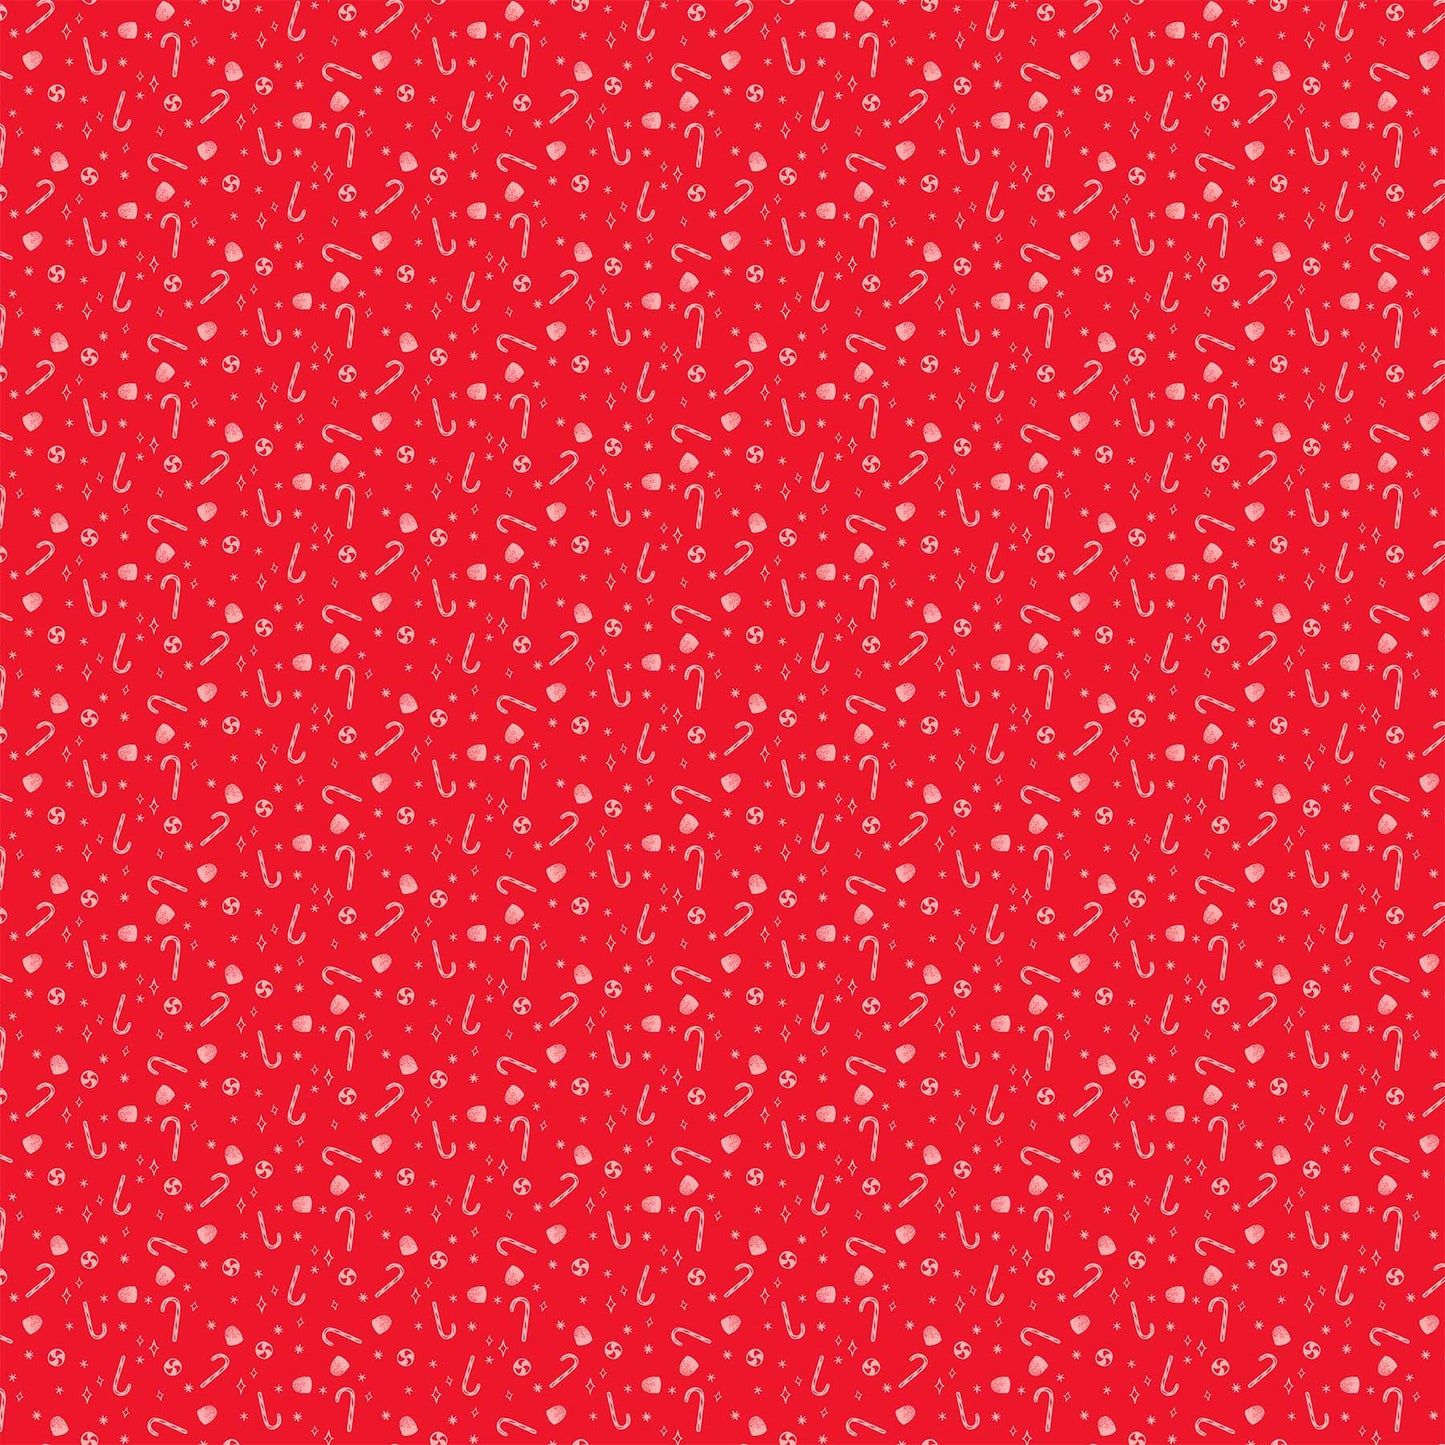 Merry Kitschmas 90671-26 Candies Red by Louise Pretzel for Figo Fabrics (sold in 25cm increments)